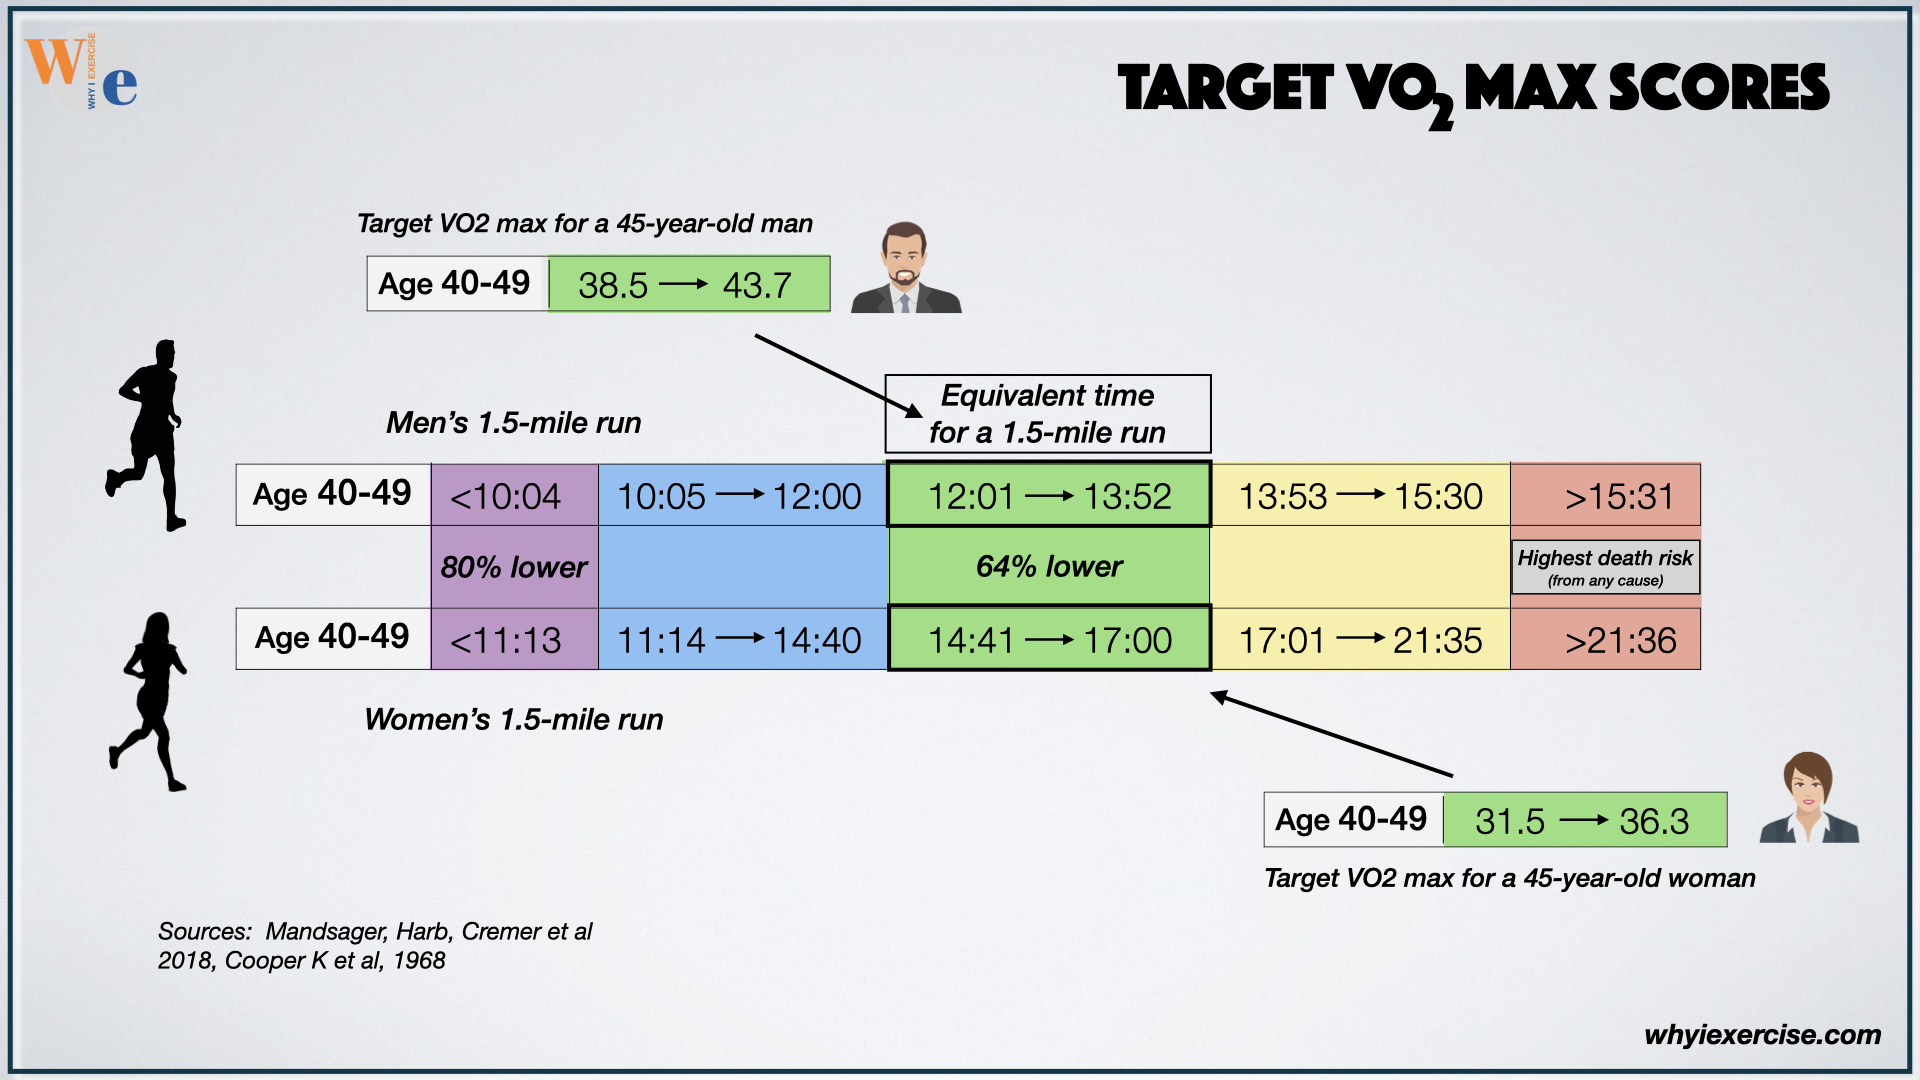 Target VO2 max scores and 1.5-mile run times age 45 men and women